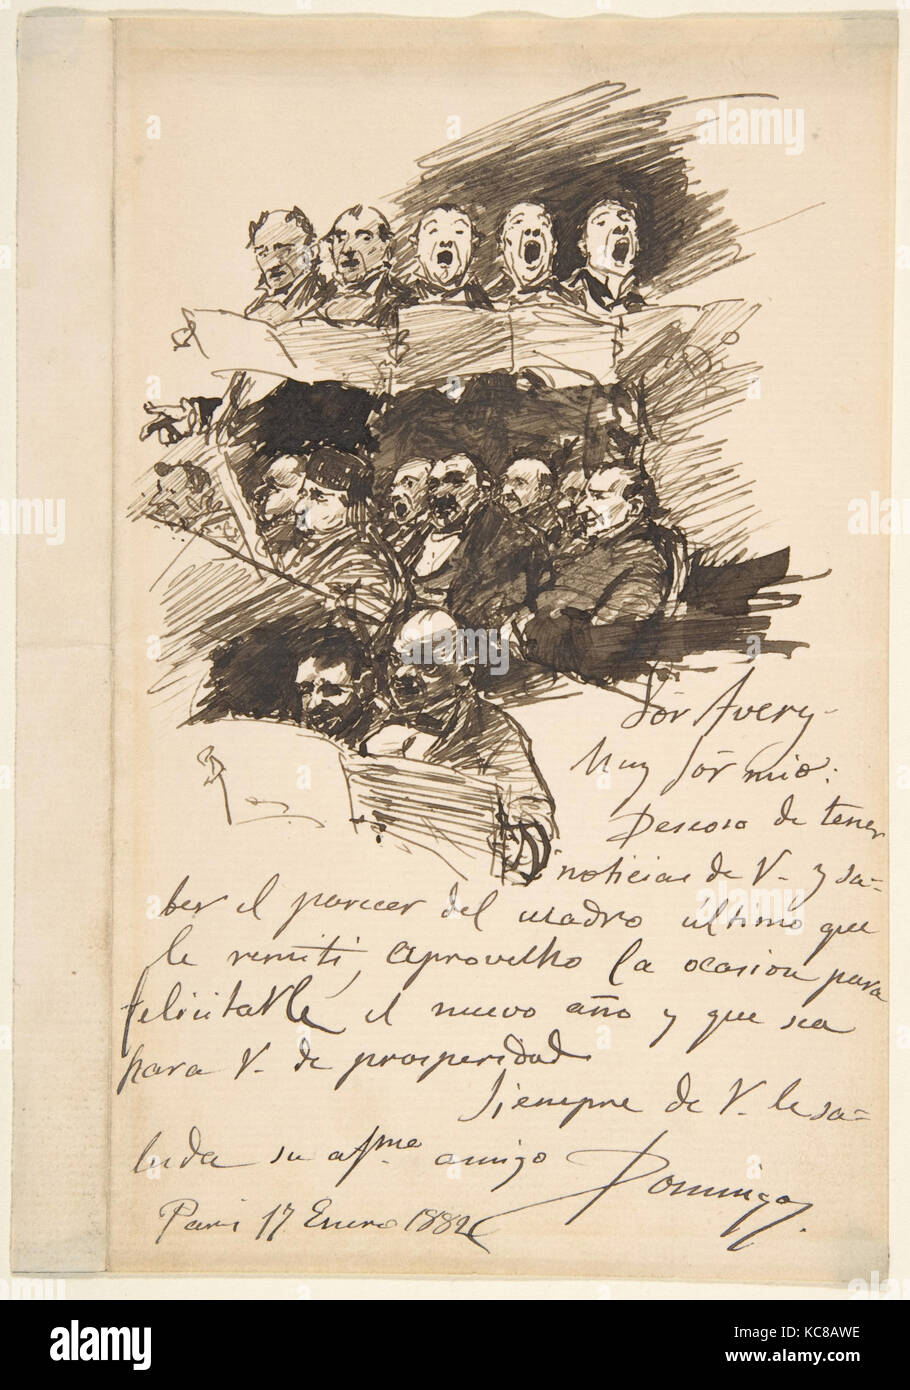 Men singing, 1882, Pen and ink, brush and wash, sheet: 7 1/8 x 5 in. (18.1 x 12.7 cm), Drawings, Francisco Domingo y Marqués Stock Photo